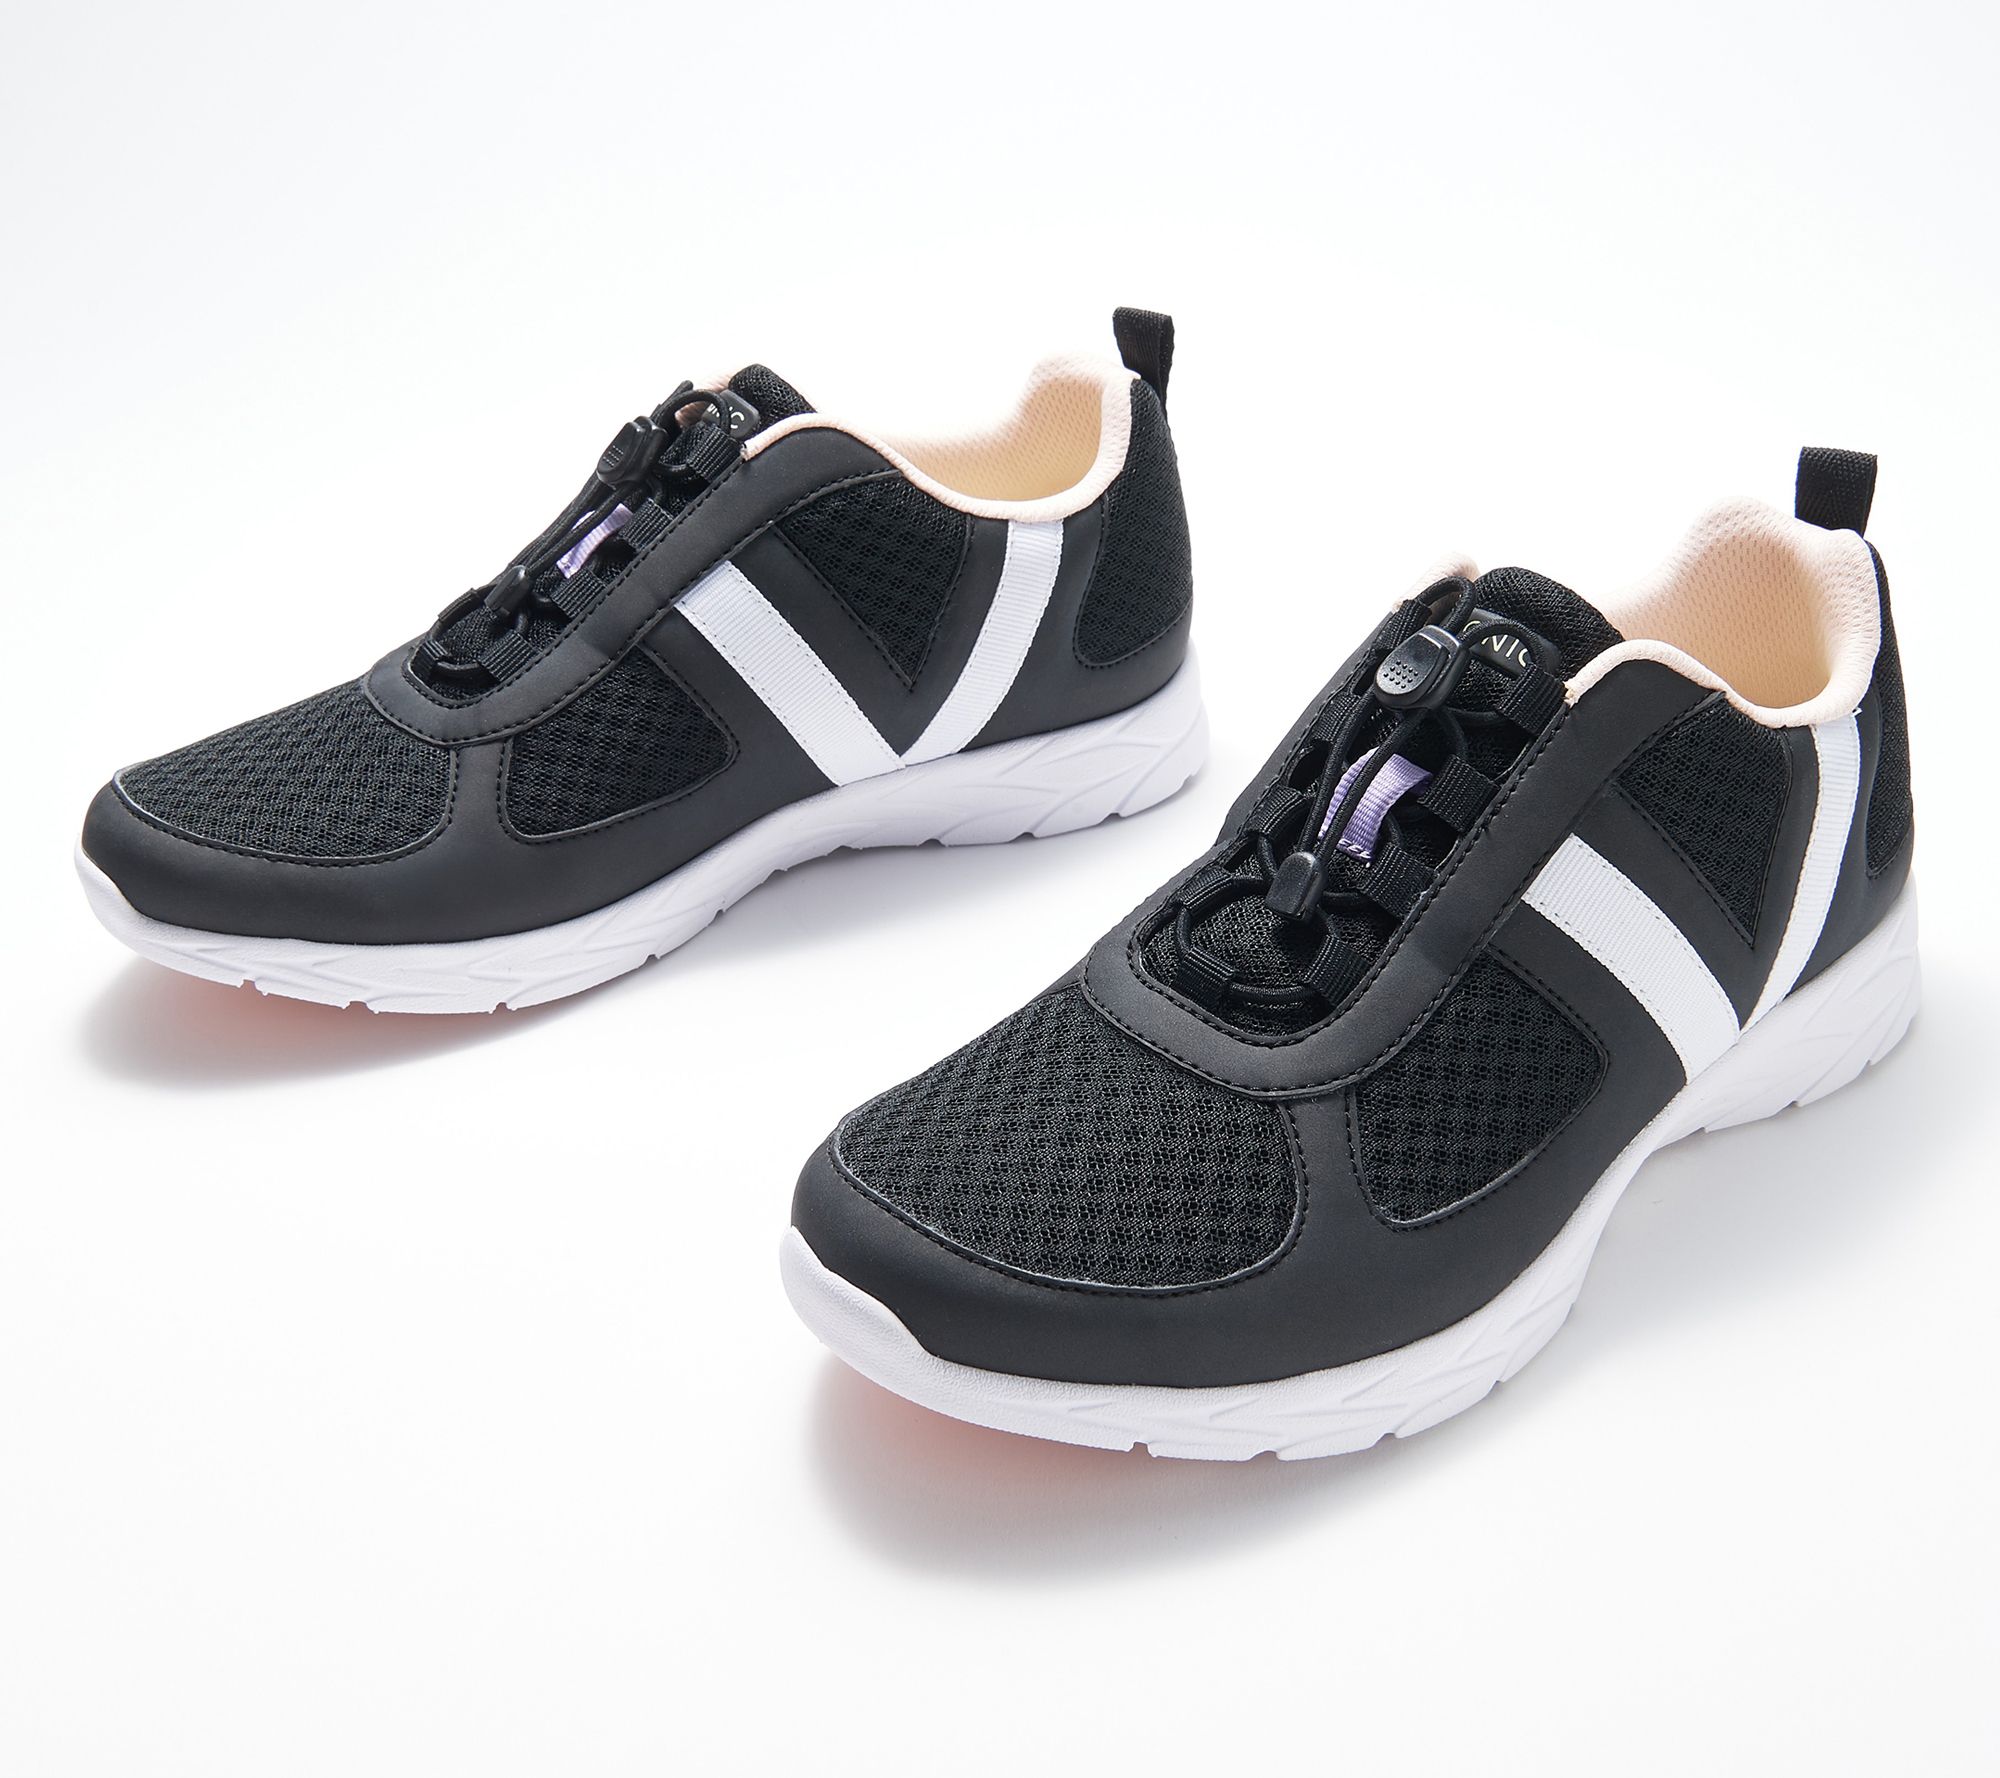 vionic shoes zulily